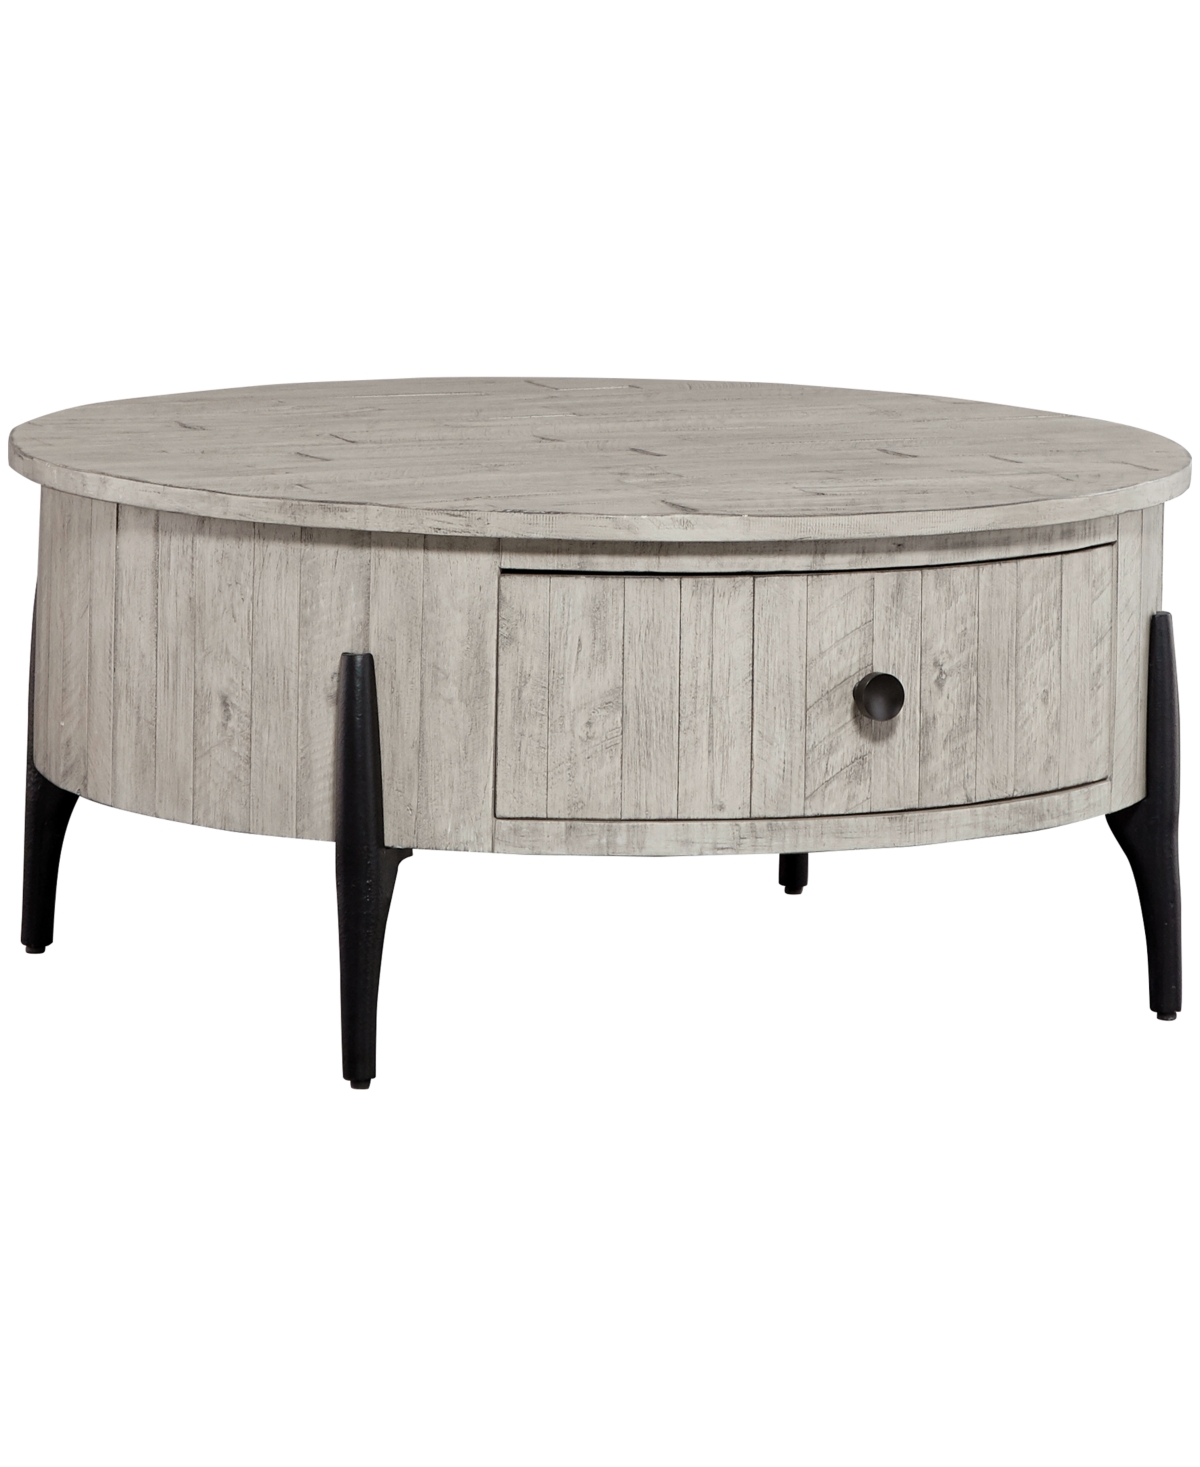 Furniture Zane Round Cocktail Table In Parchment